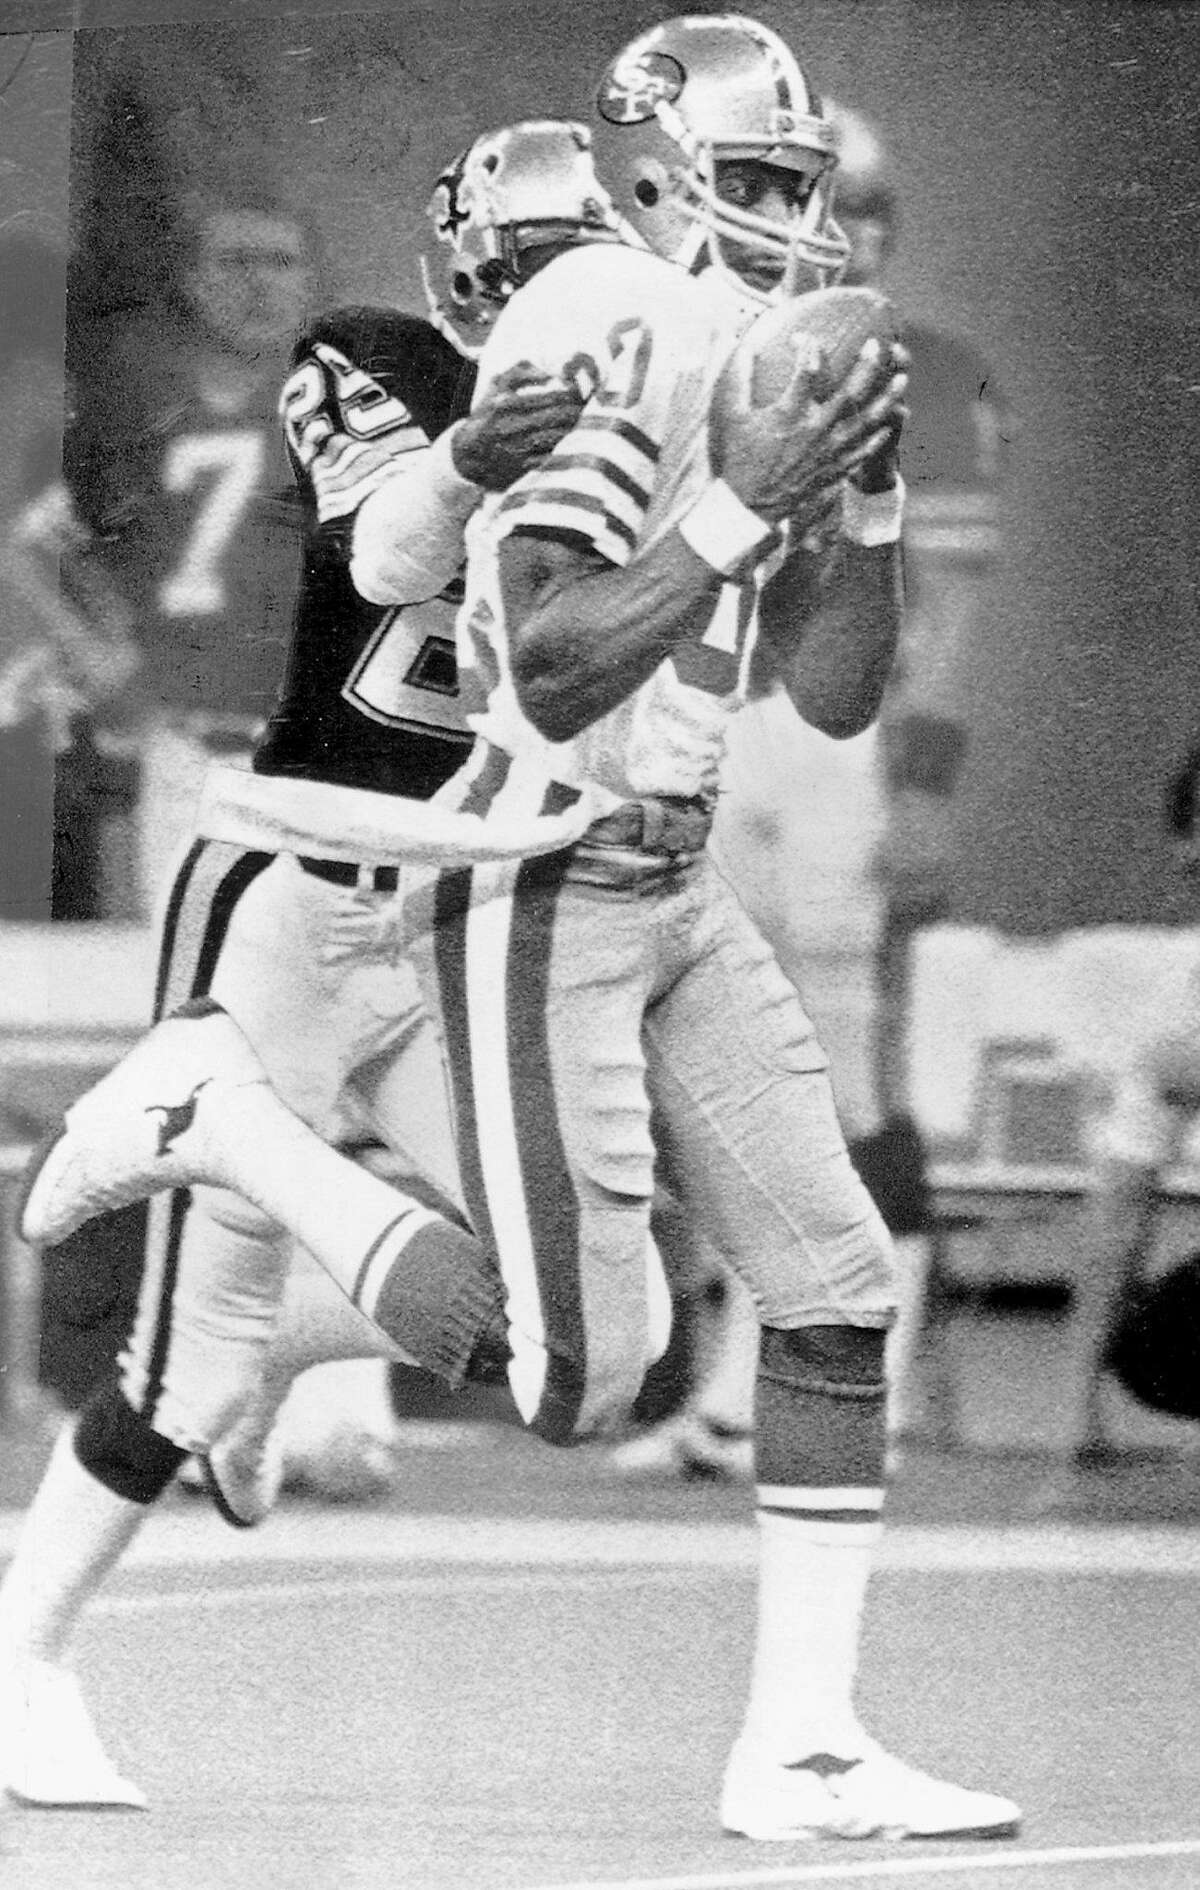 49ers17_ph5.jpg December 15, 1985 - Jerry Rice (80) grabs a long pass from Joe Montana over New Orleans Saints cornerback Johnnie Poe during fourth quarter action in New Orleans. Frederic Larson/ San Francisco Chronicle File Photo/1985 Ran on: 11-17-2006 Jerry Rice's hands and great concentration bring in his second of 4 TDs against the St. Louis Rams in 1986. Ran on: 11-17-2006 Jerry Rice's hands and great concentration bring in his second of 4 TDs against the St. Louis Rams in 1986. Ran on: 04-25-2010 Wide receiver Jerry Rice was a first-round draft pick, taken 16th overall by the 49ers in 1985.